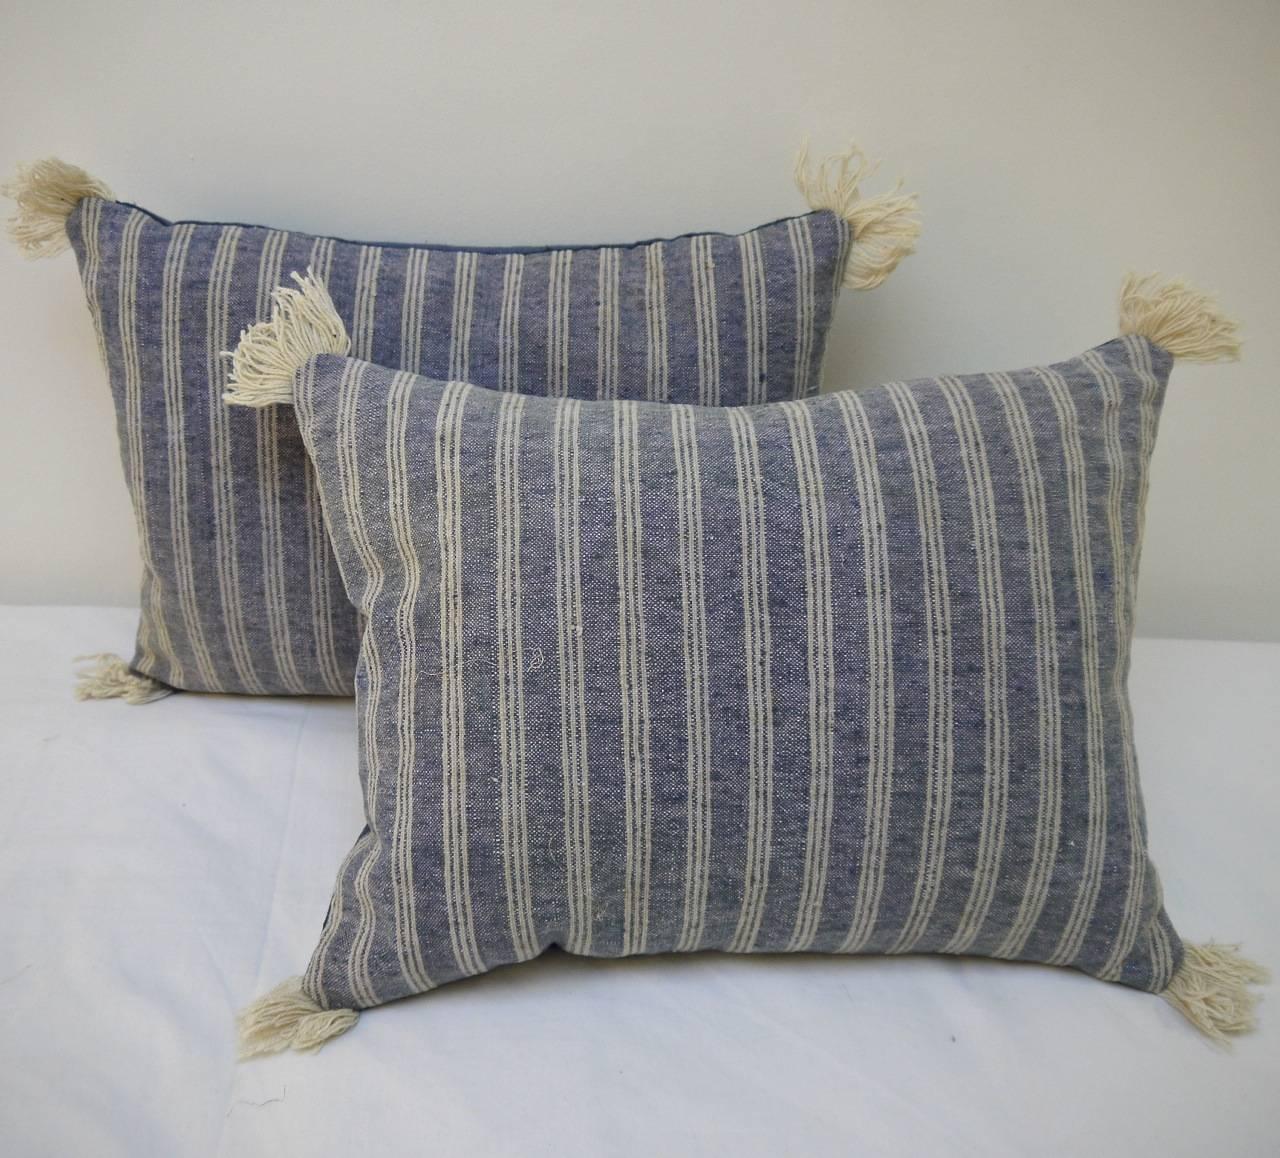 A French 19th century woven cotton and wool cushion with antique wool fringing on each corner. The soft indigo stripe alternates with a wool stripe of a very pale greenish blue hue. Backed with a dyed 19th century French linen and slipstitched